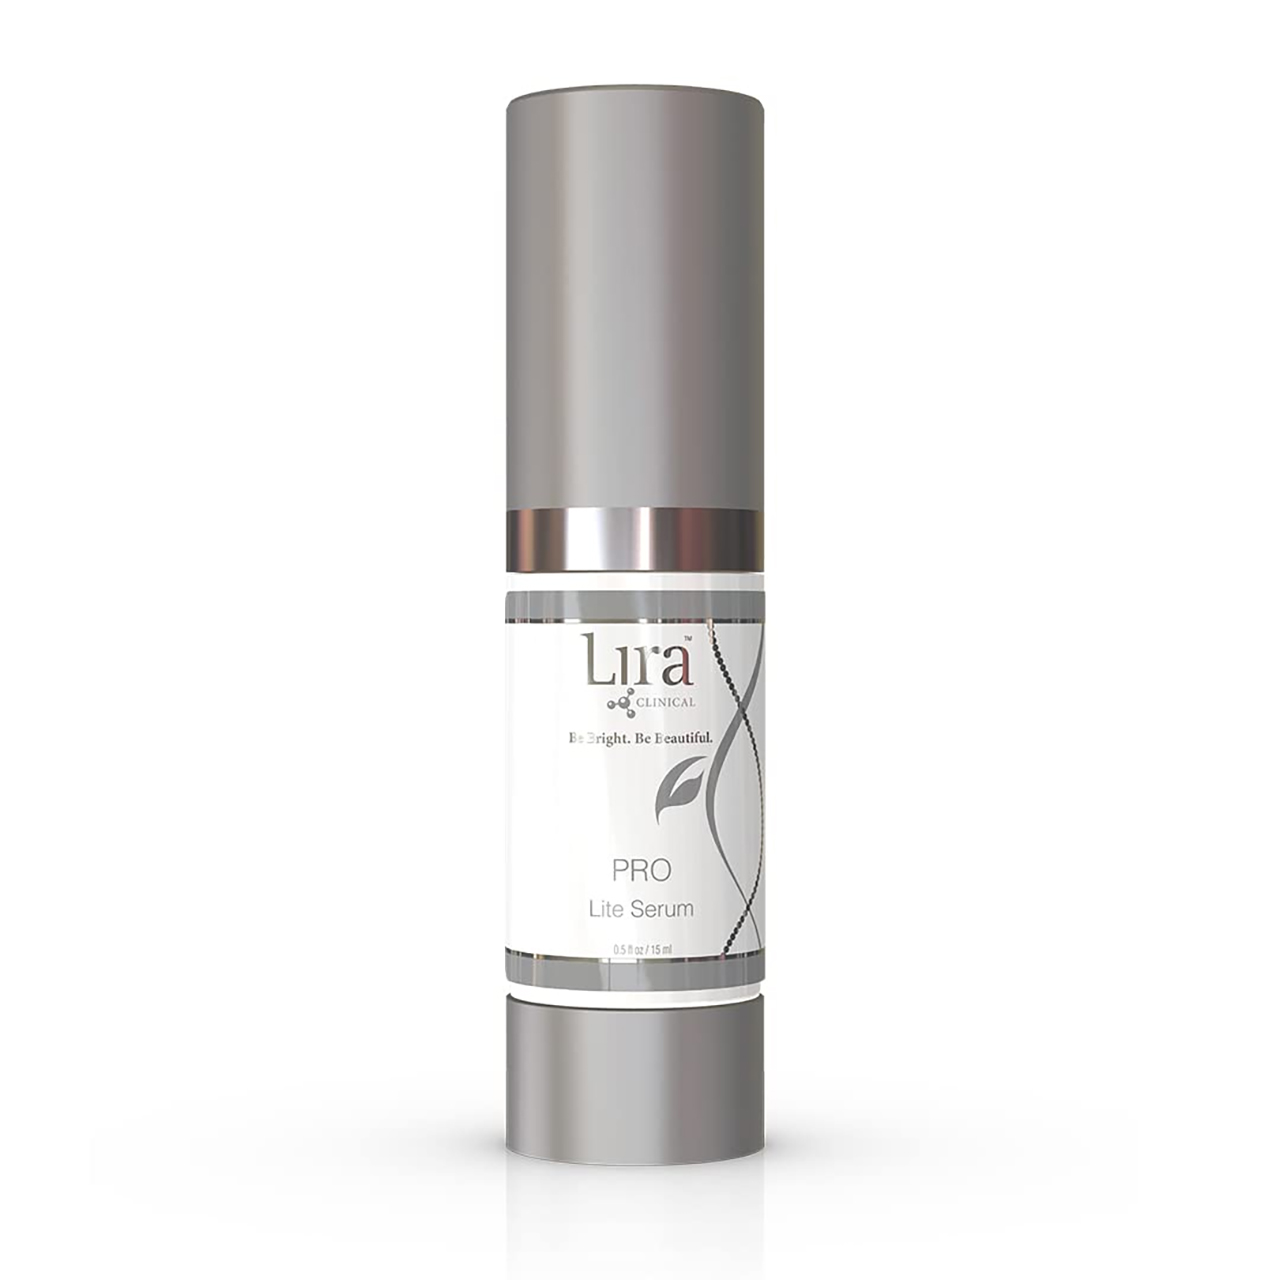 Lira Clinical PRO Lite Serum with PSC - 0.5 oz Questions & Answers